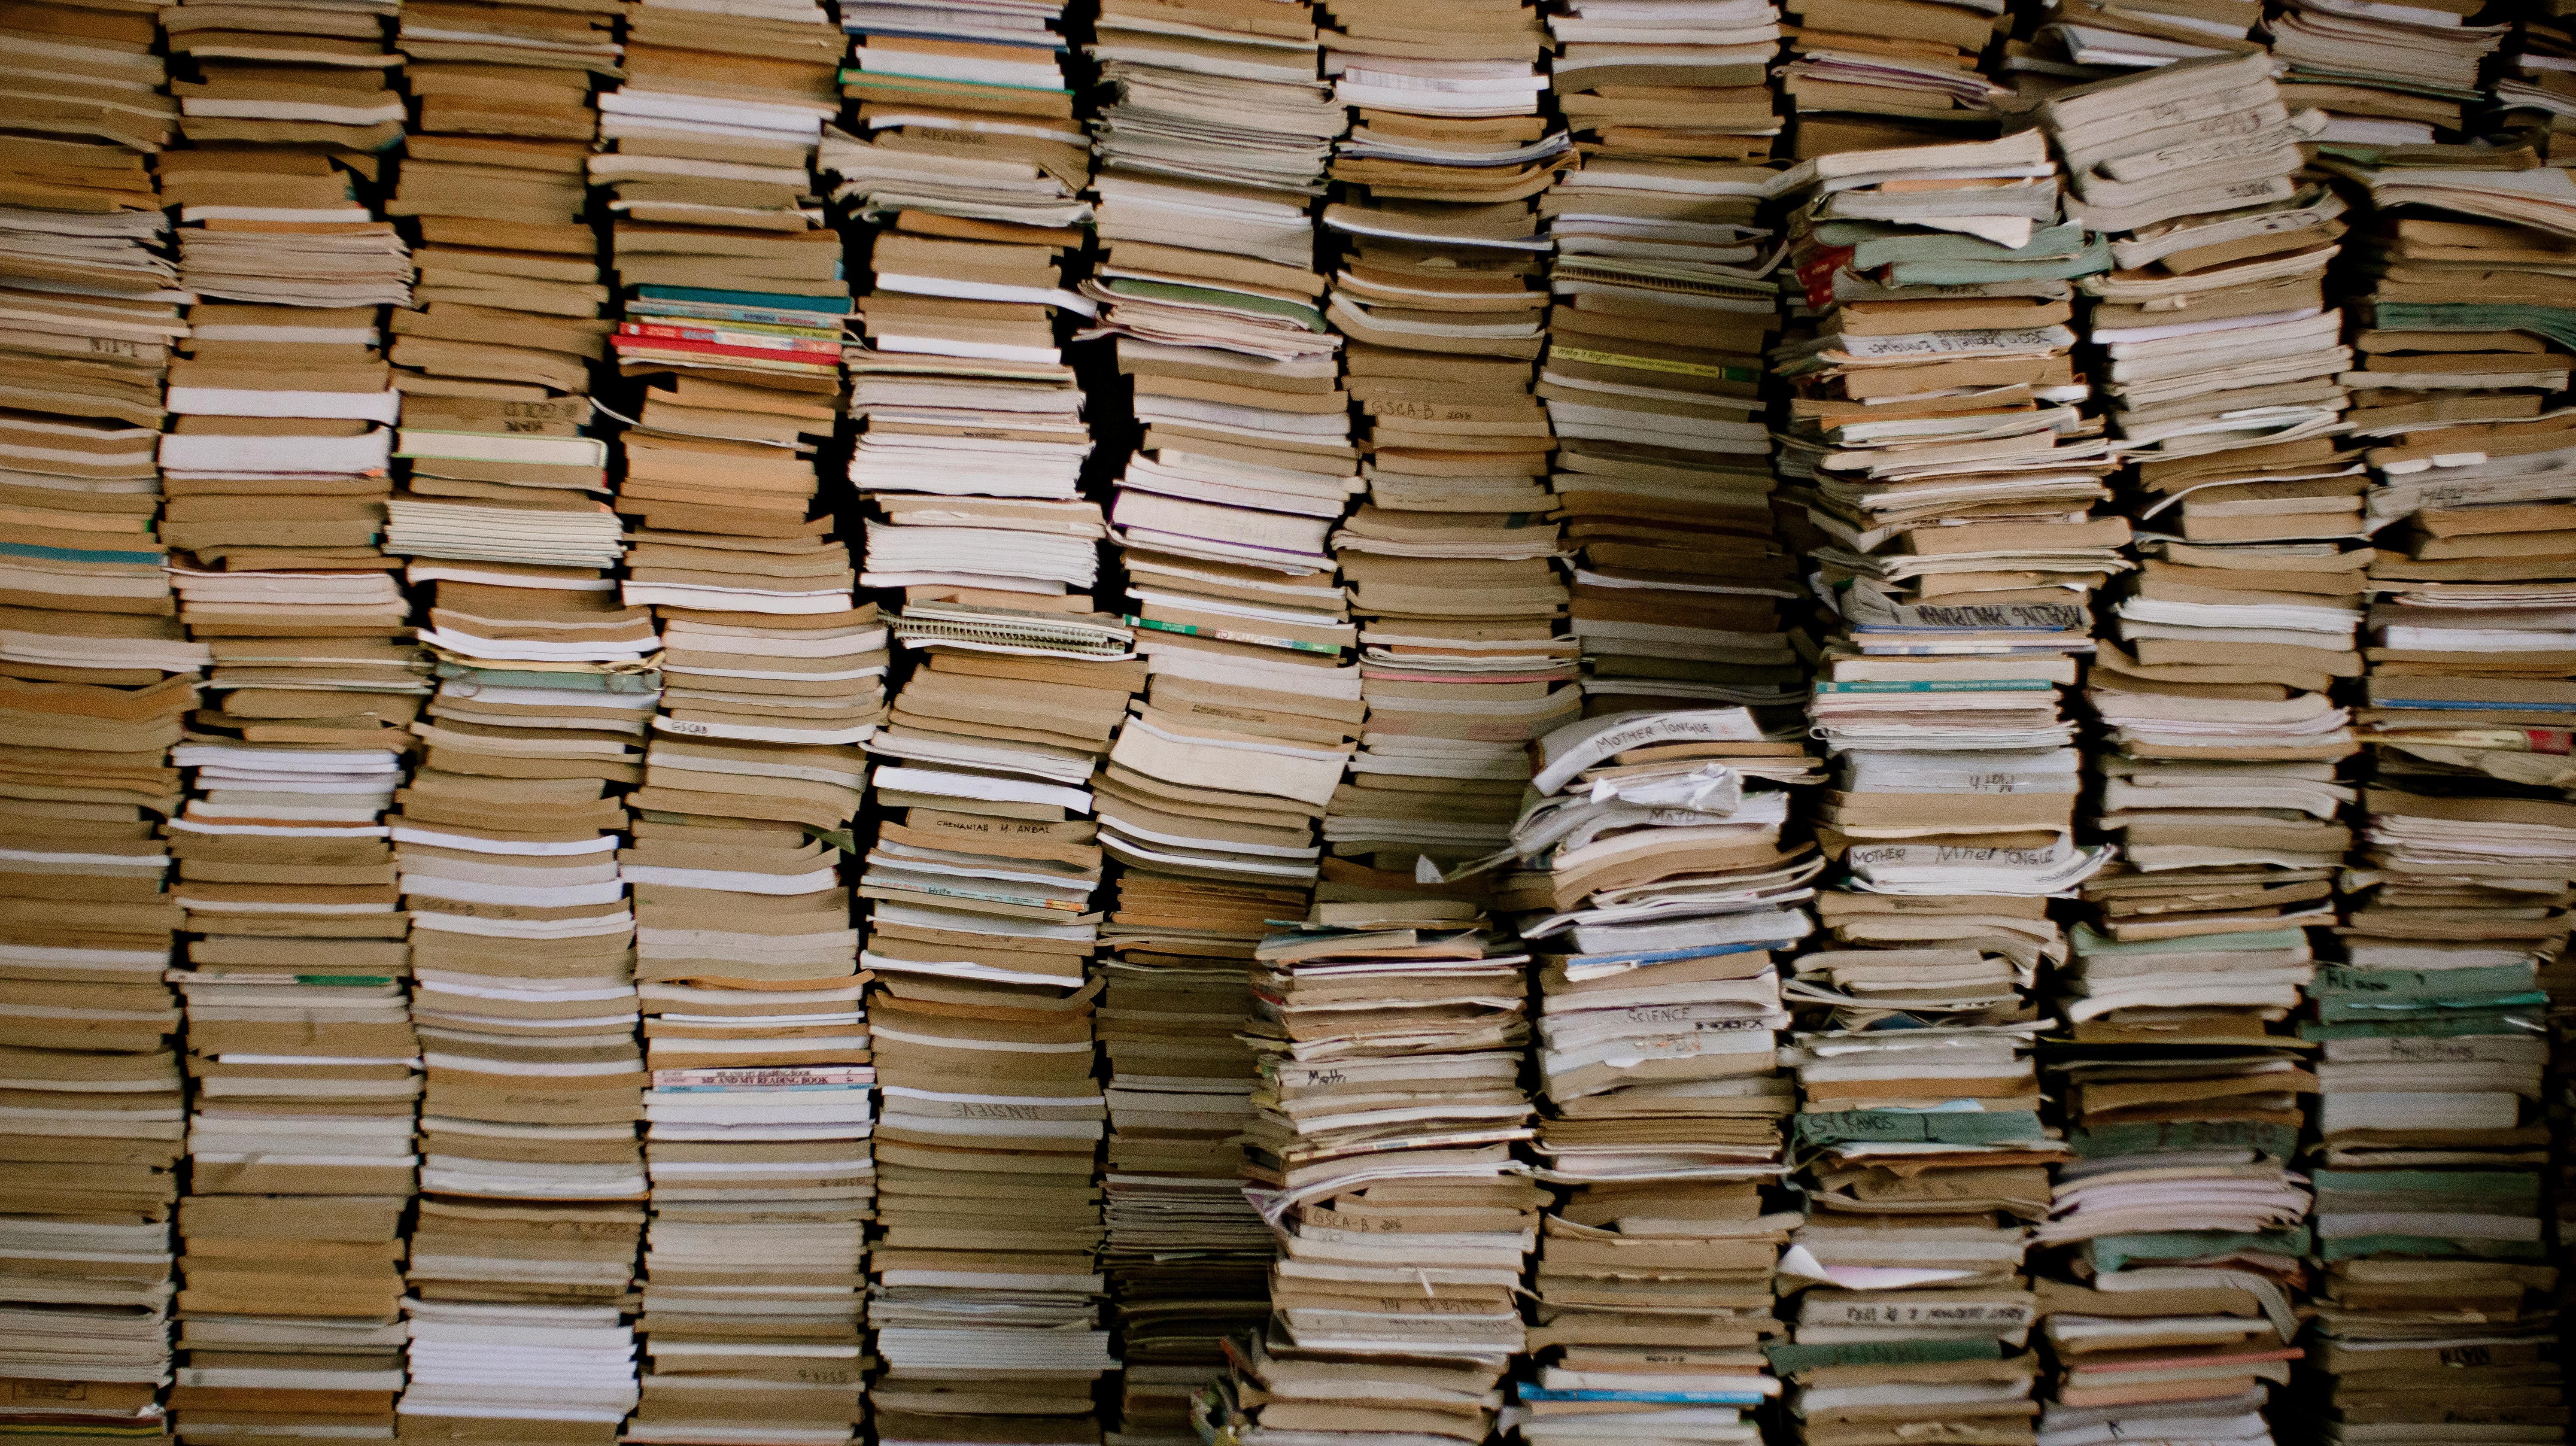 Free Stacks of Old Books Stock Photo